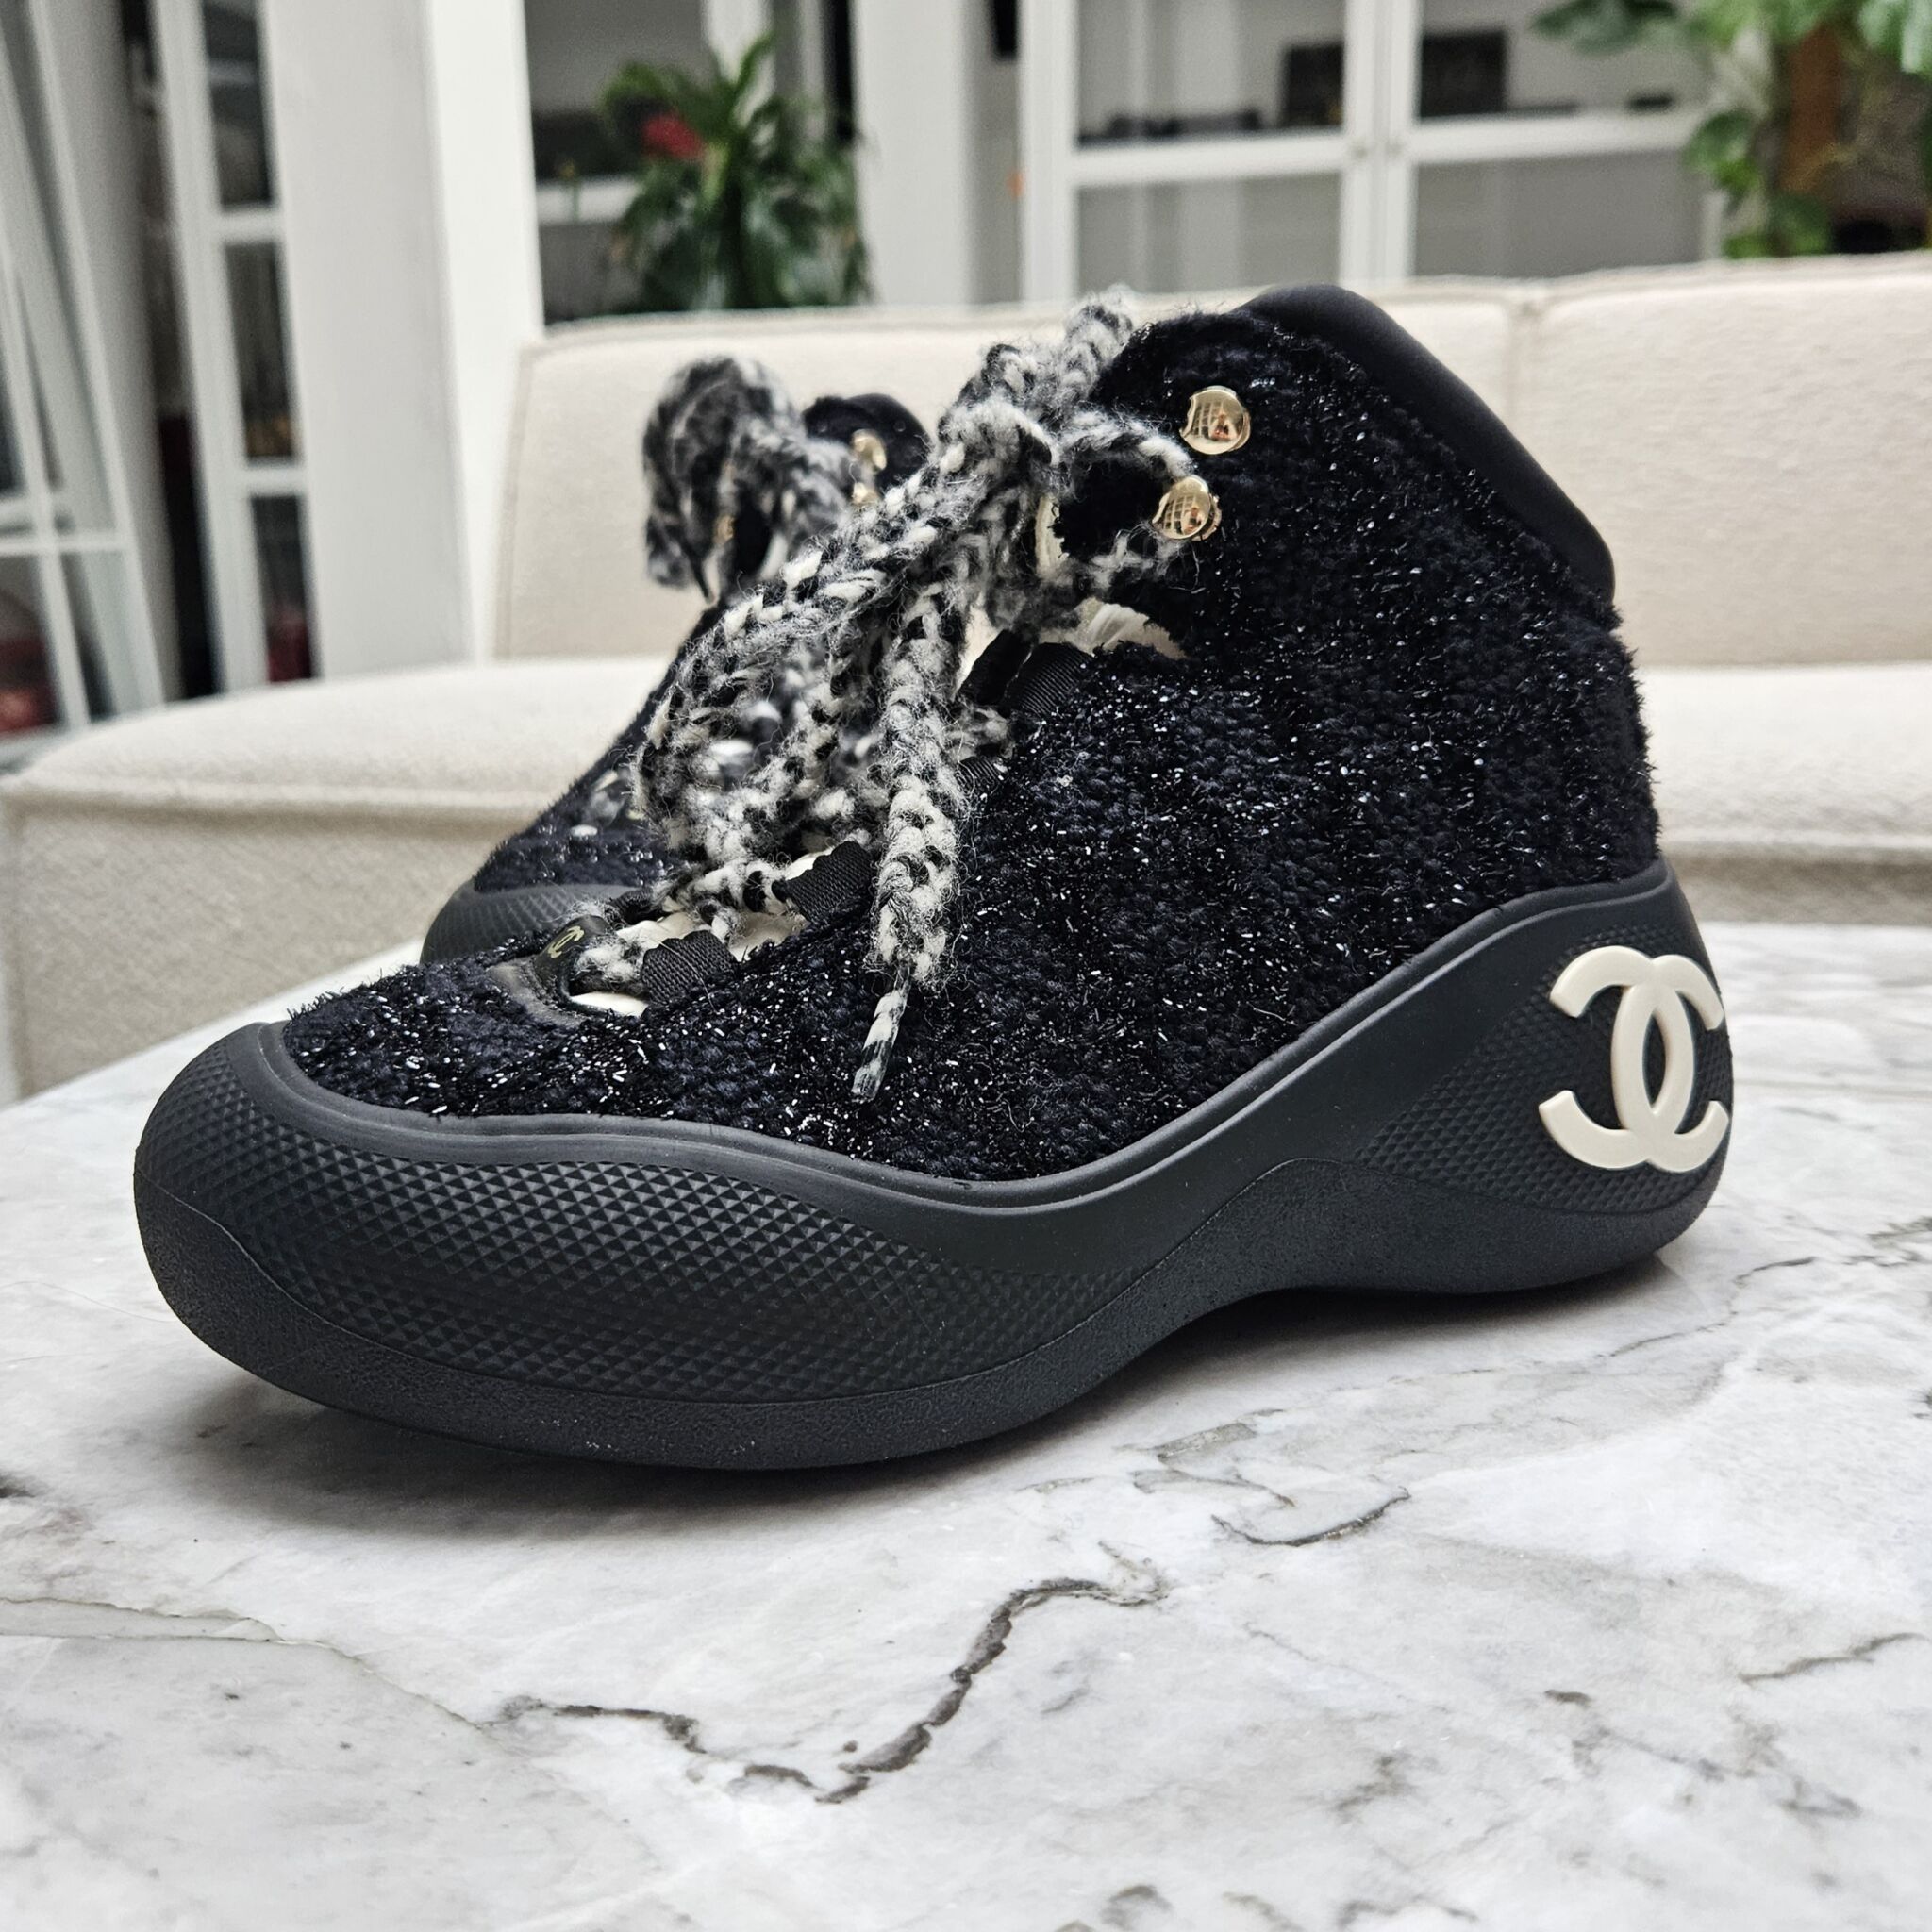 Chanel CC Sneaker Boots, Glitter Tweed, Black/White, 38 - Laulay Luxury